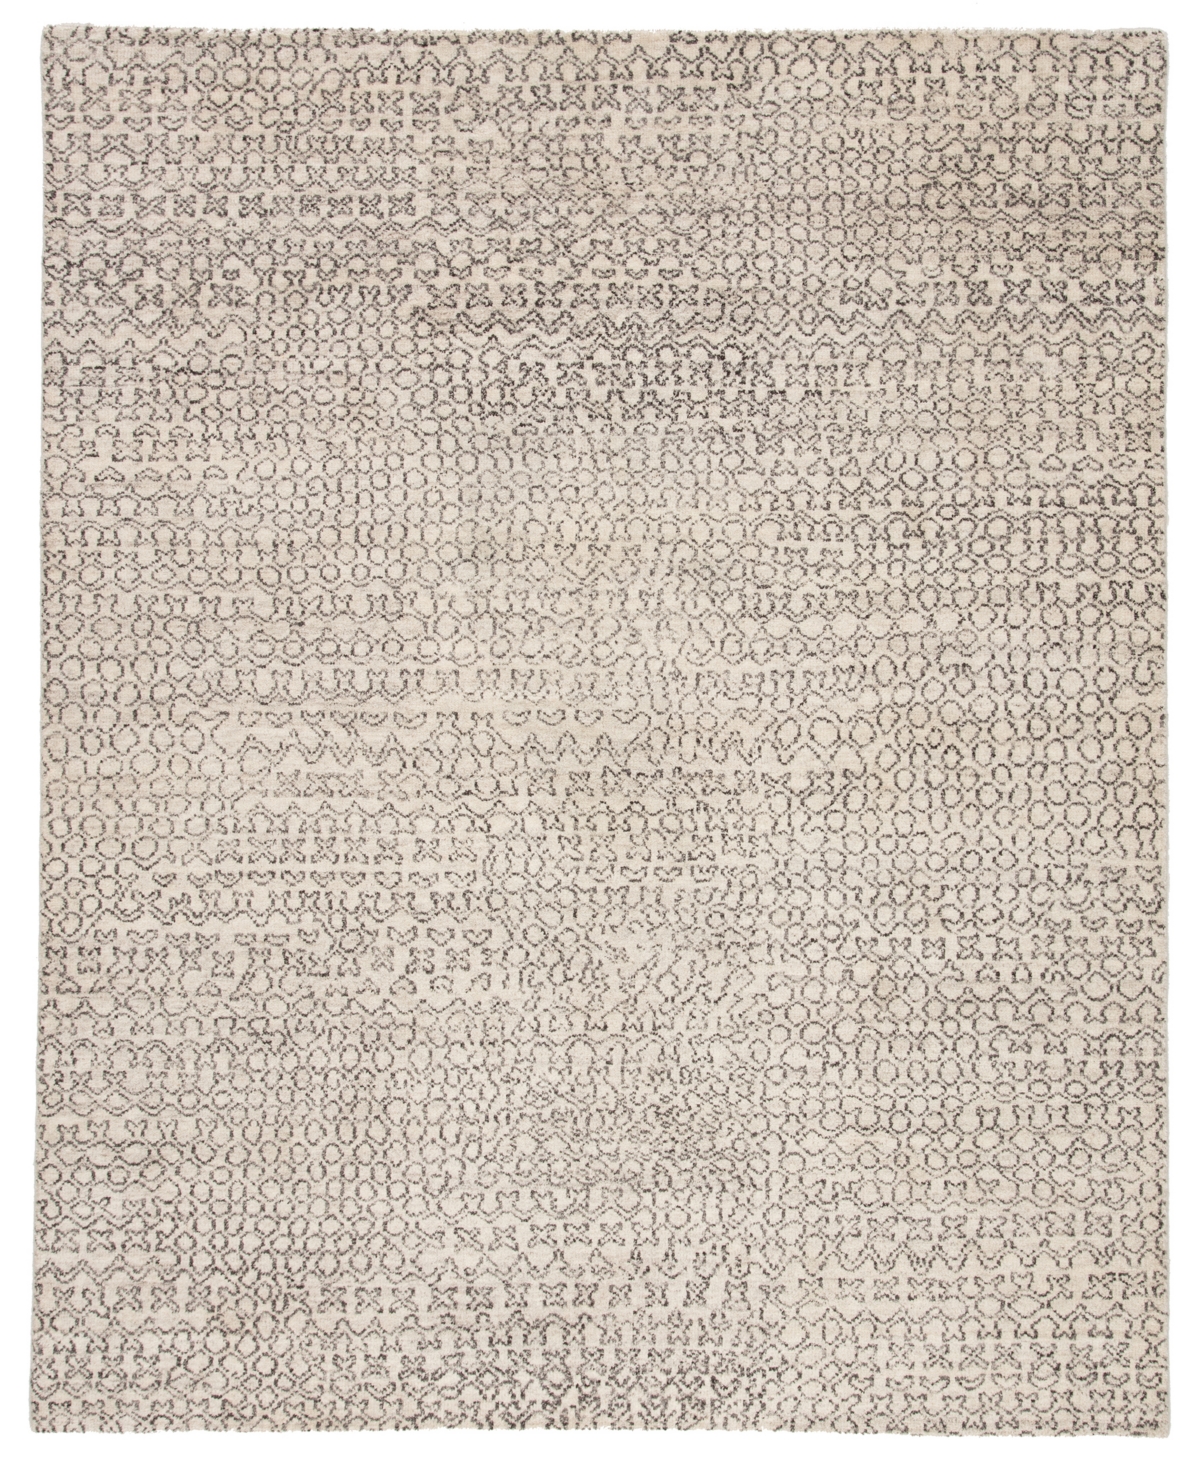 Jaipur Living Reverb by Pollack REP02 8' x 10' Area Rug - White